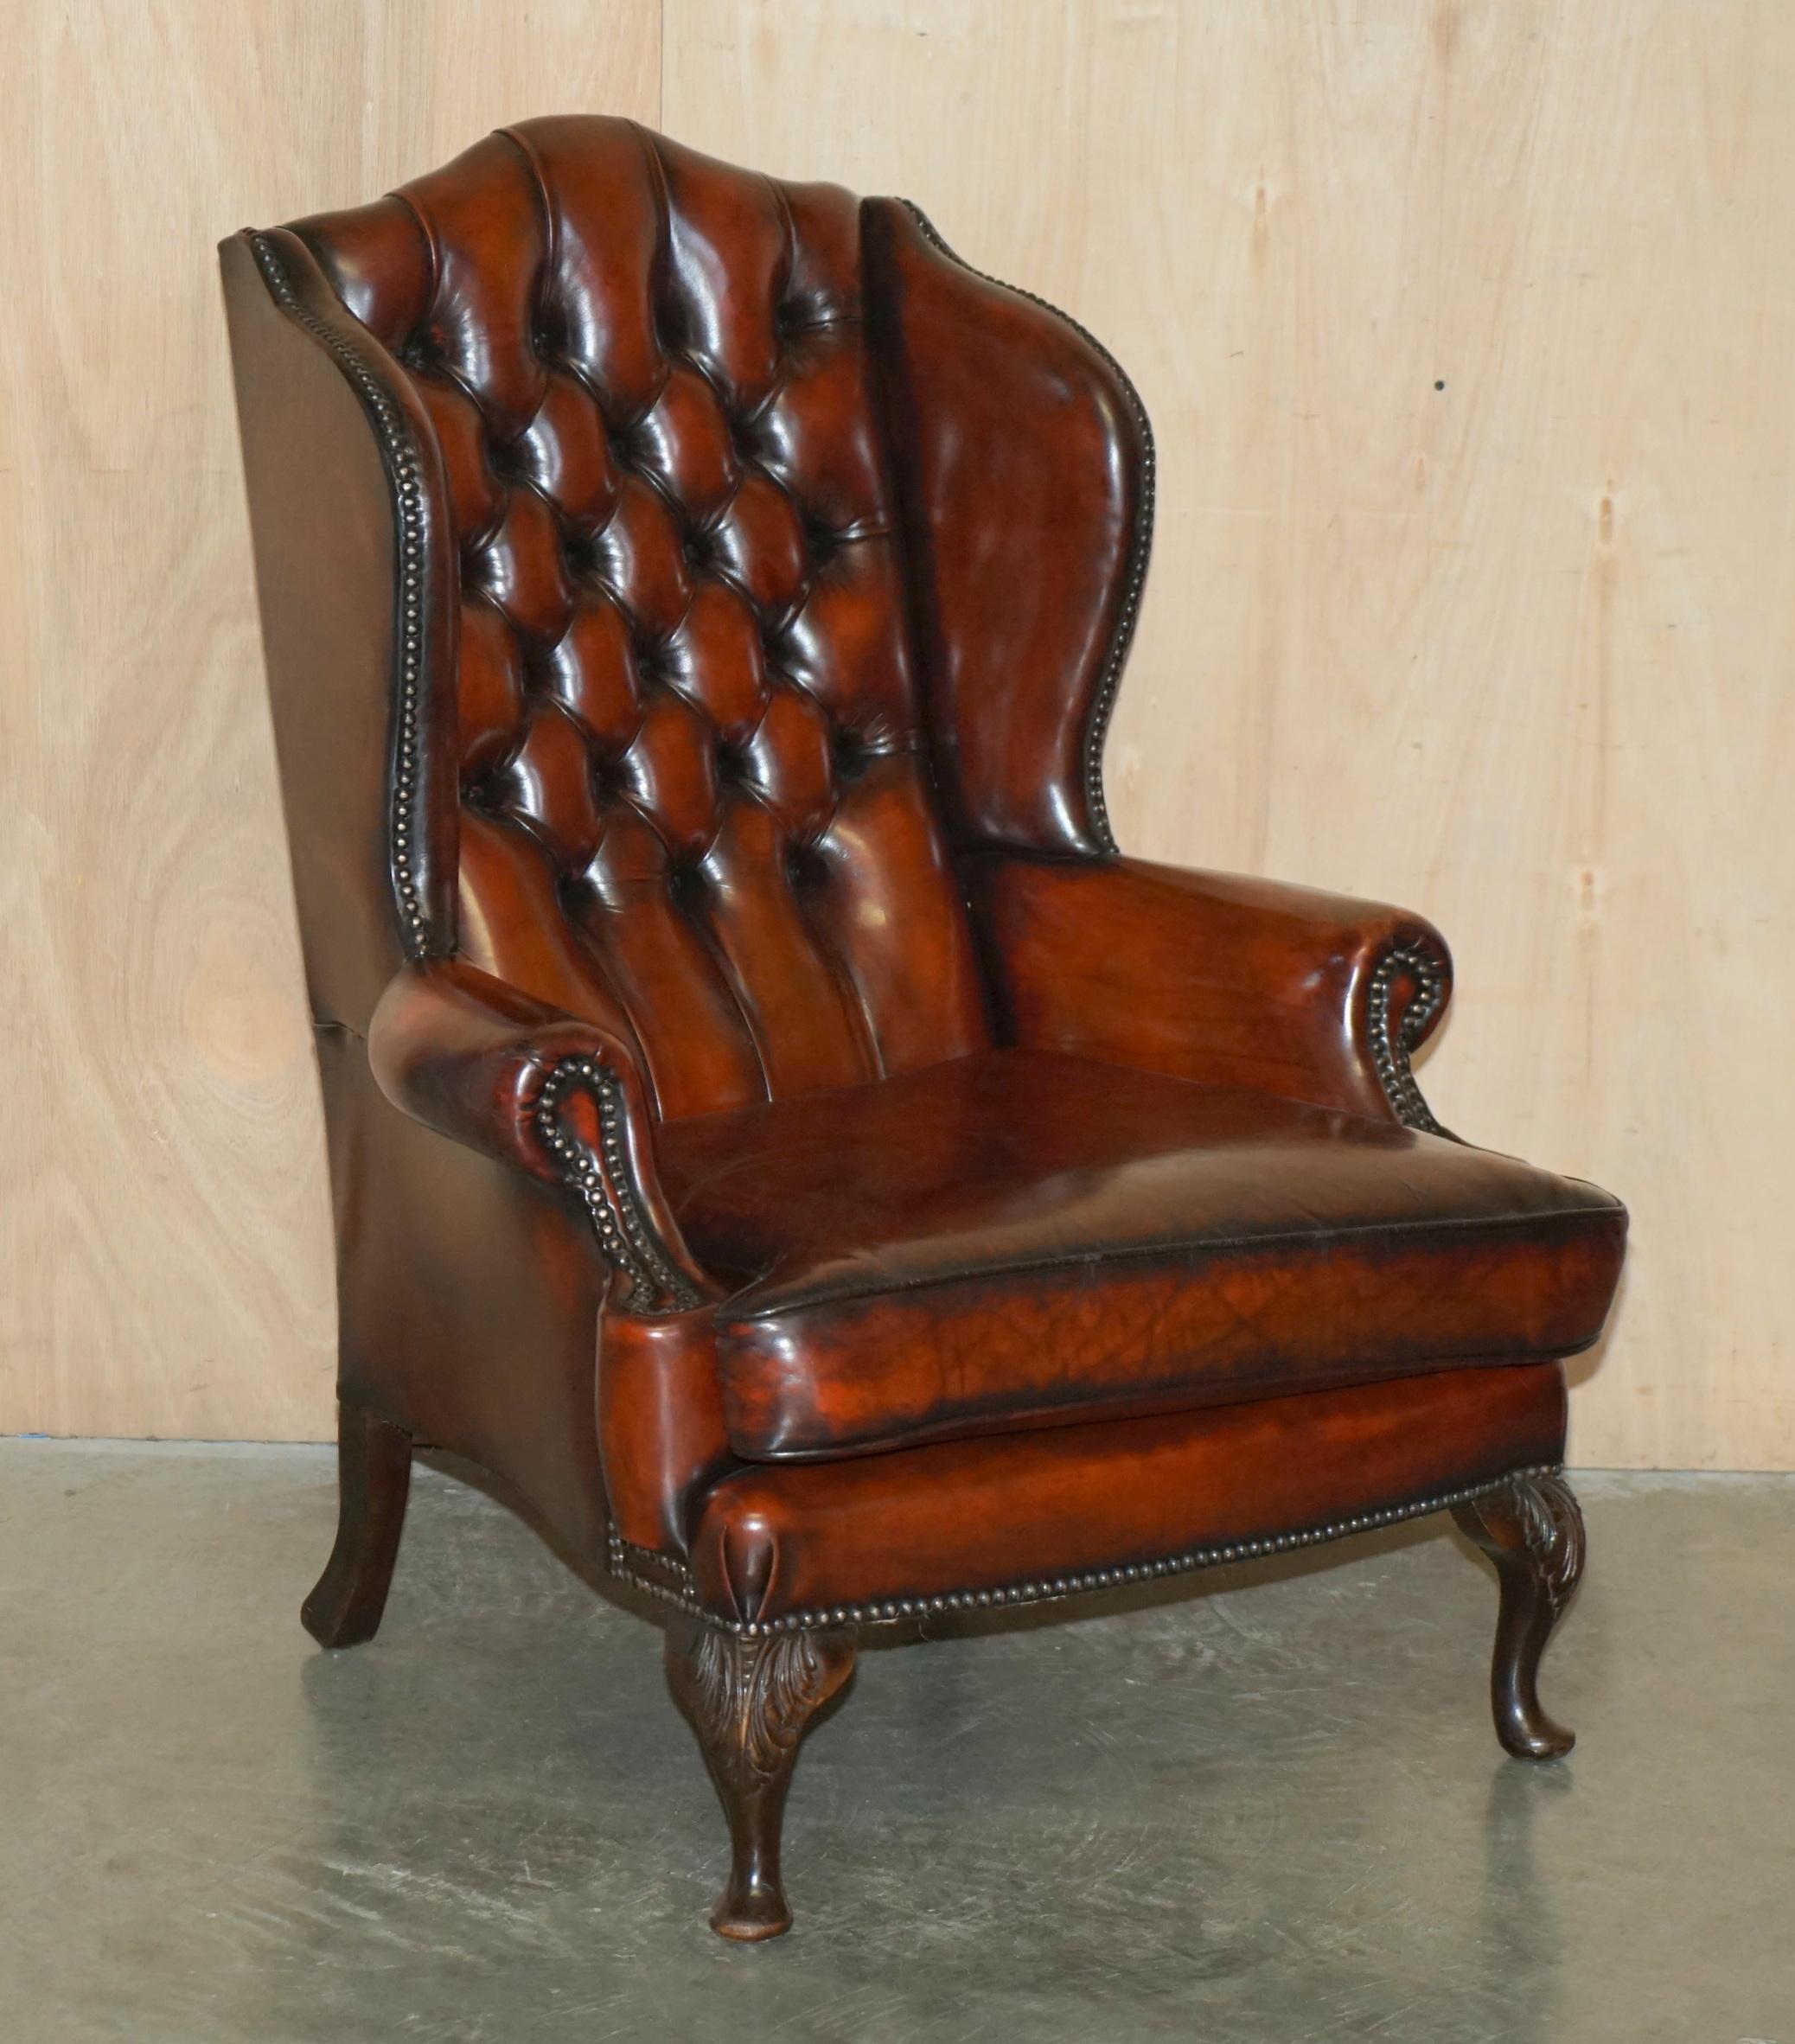 Royal House Antiques

Royal House Antiques is delighted to offer for sale this stunning pair of fully restored hand dyed Bordeaux leather Upholstery Wingback armchairs

Please note the delivery fee listed is just a guide, it covers within the M25